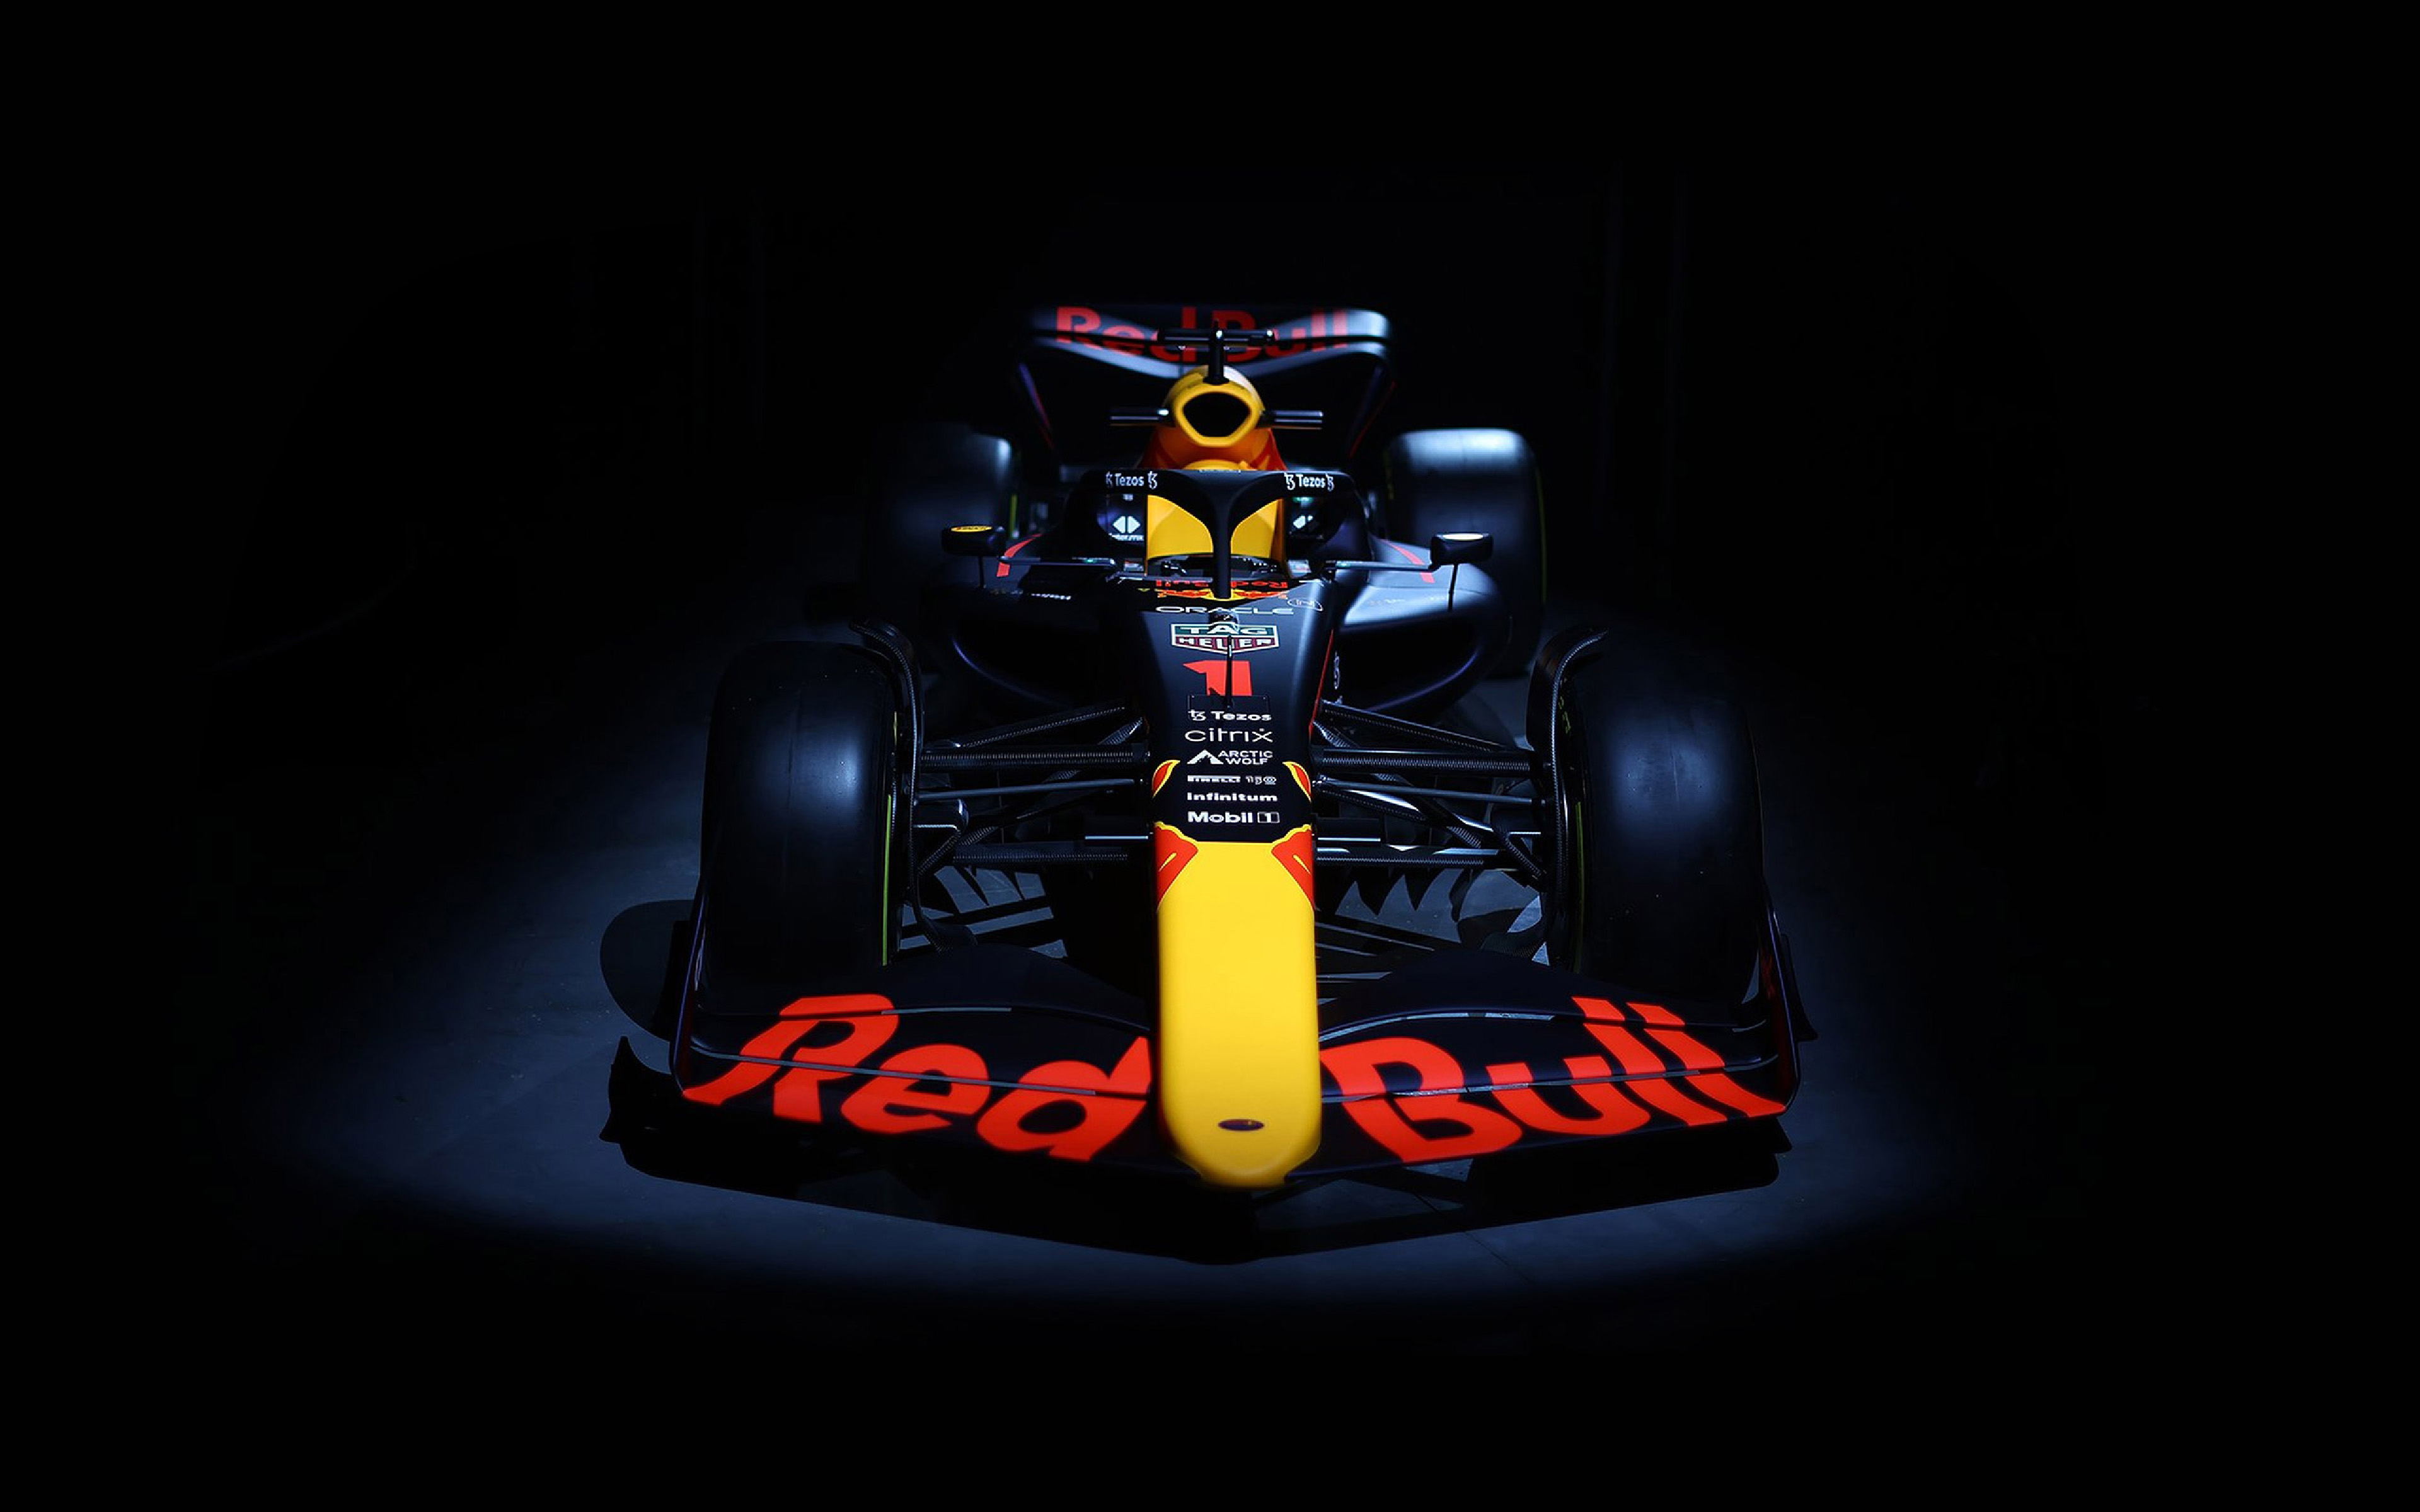 Download wallpaper Red Bull Racing RB 4k front view, Formula new RB F1 racing cars F1 RB Red Bull Racing for desktop with resolution 3840x2400. High Quality HD picture wallpaper